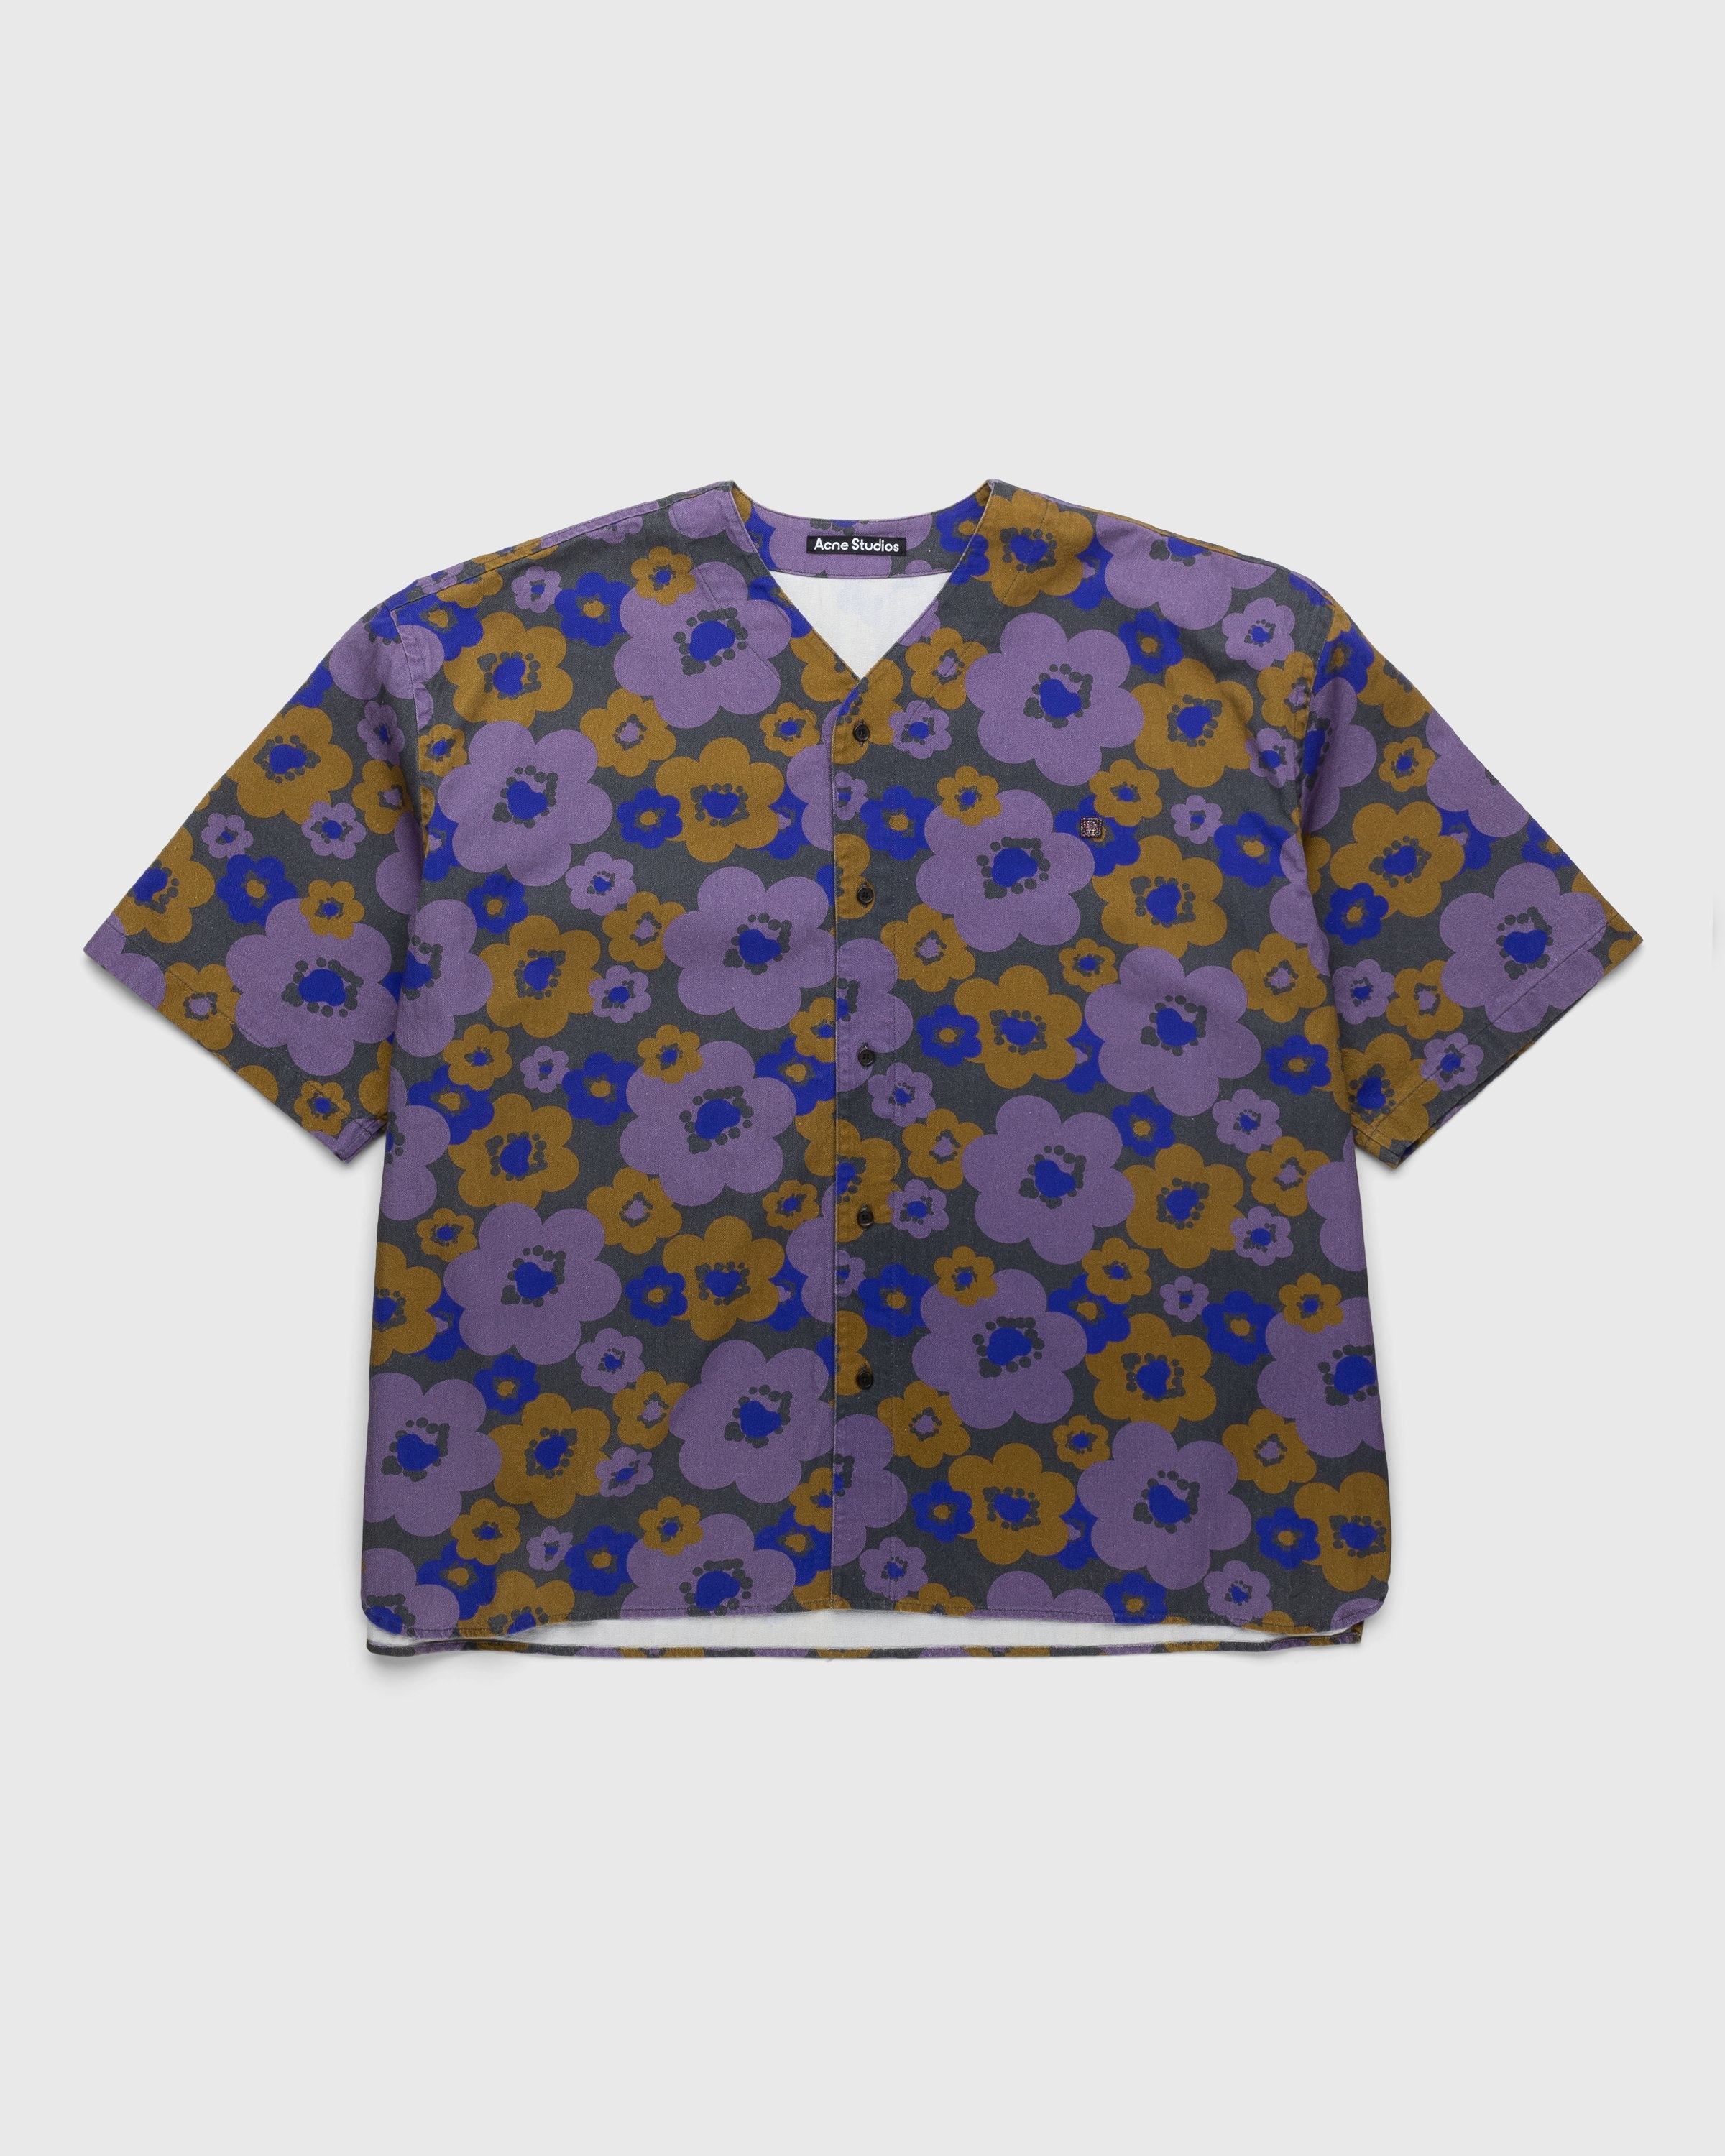 Acne Studios – Floral Short-Sleeve Button-Up Purple/Brown - Shortsleeve Shirts - Multi - Image 1